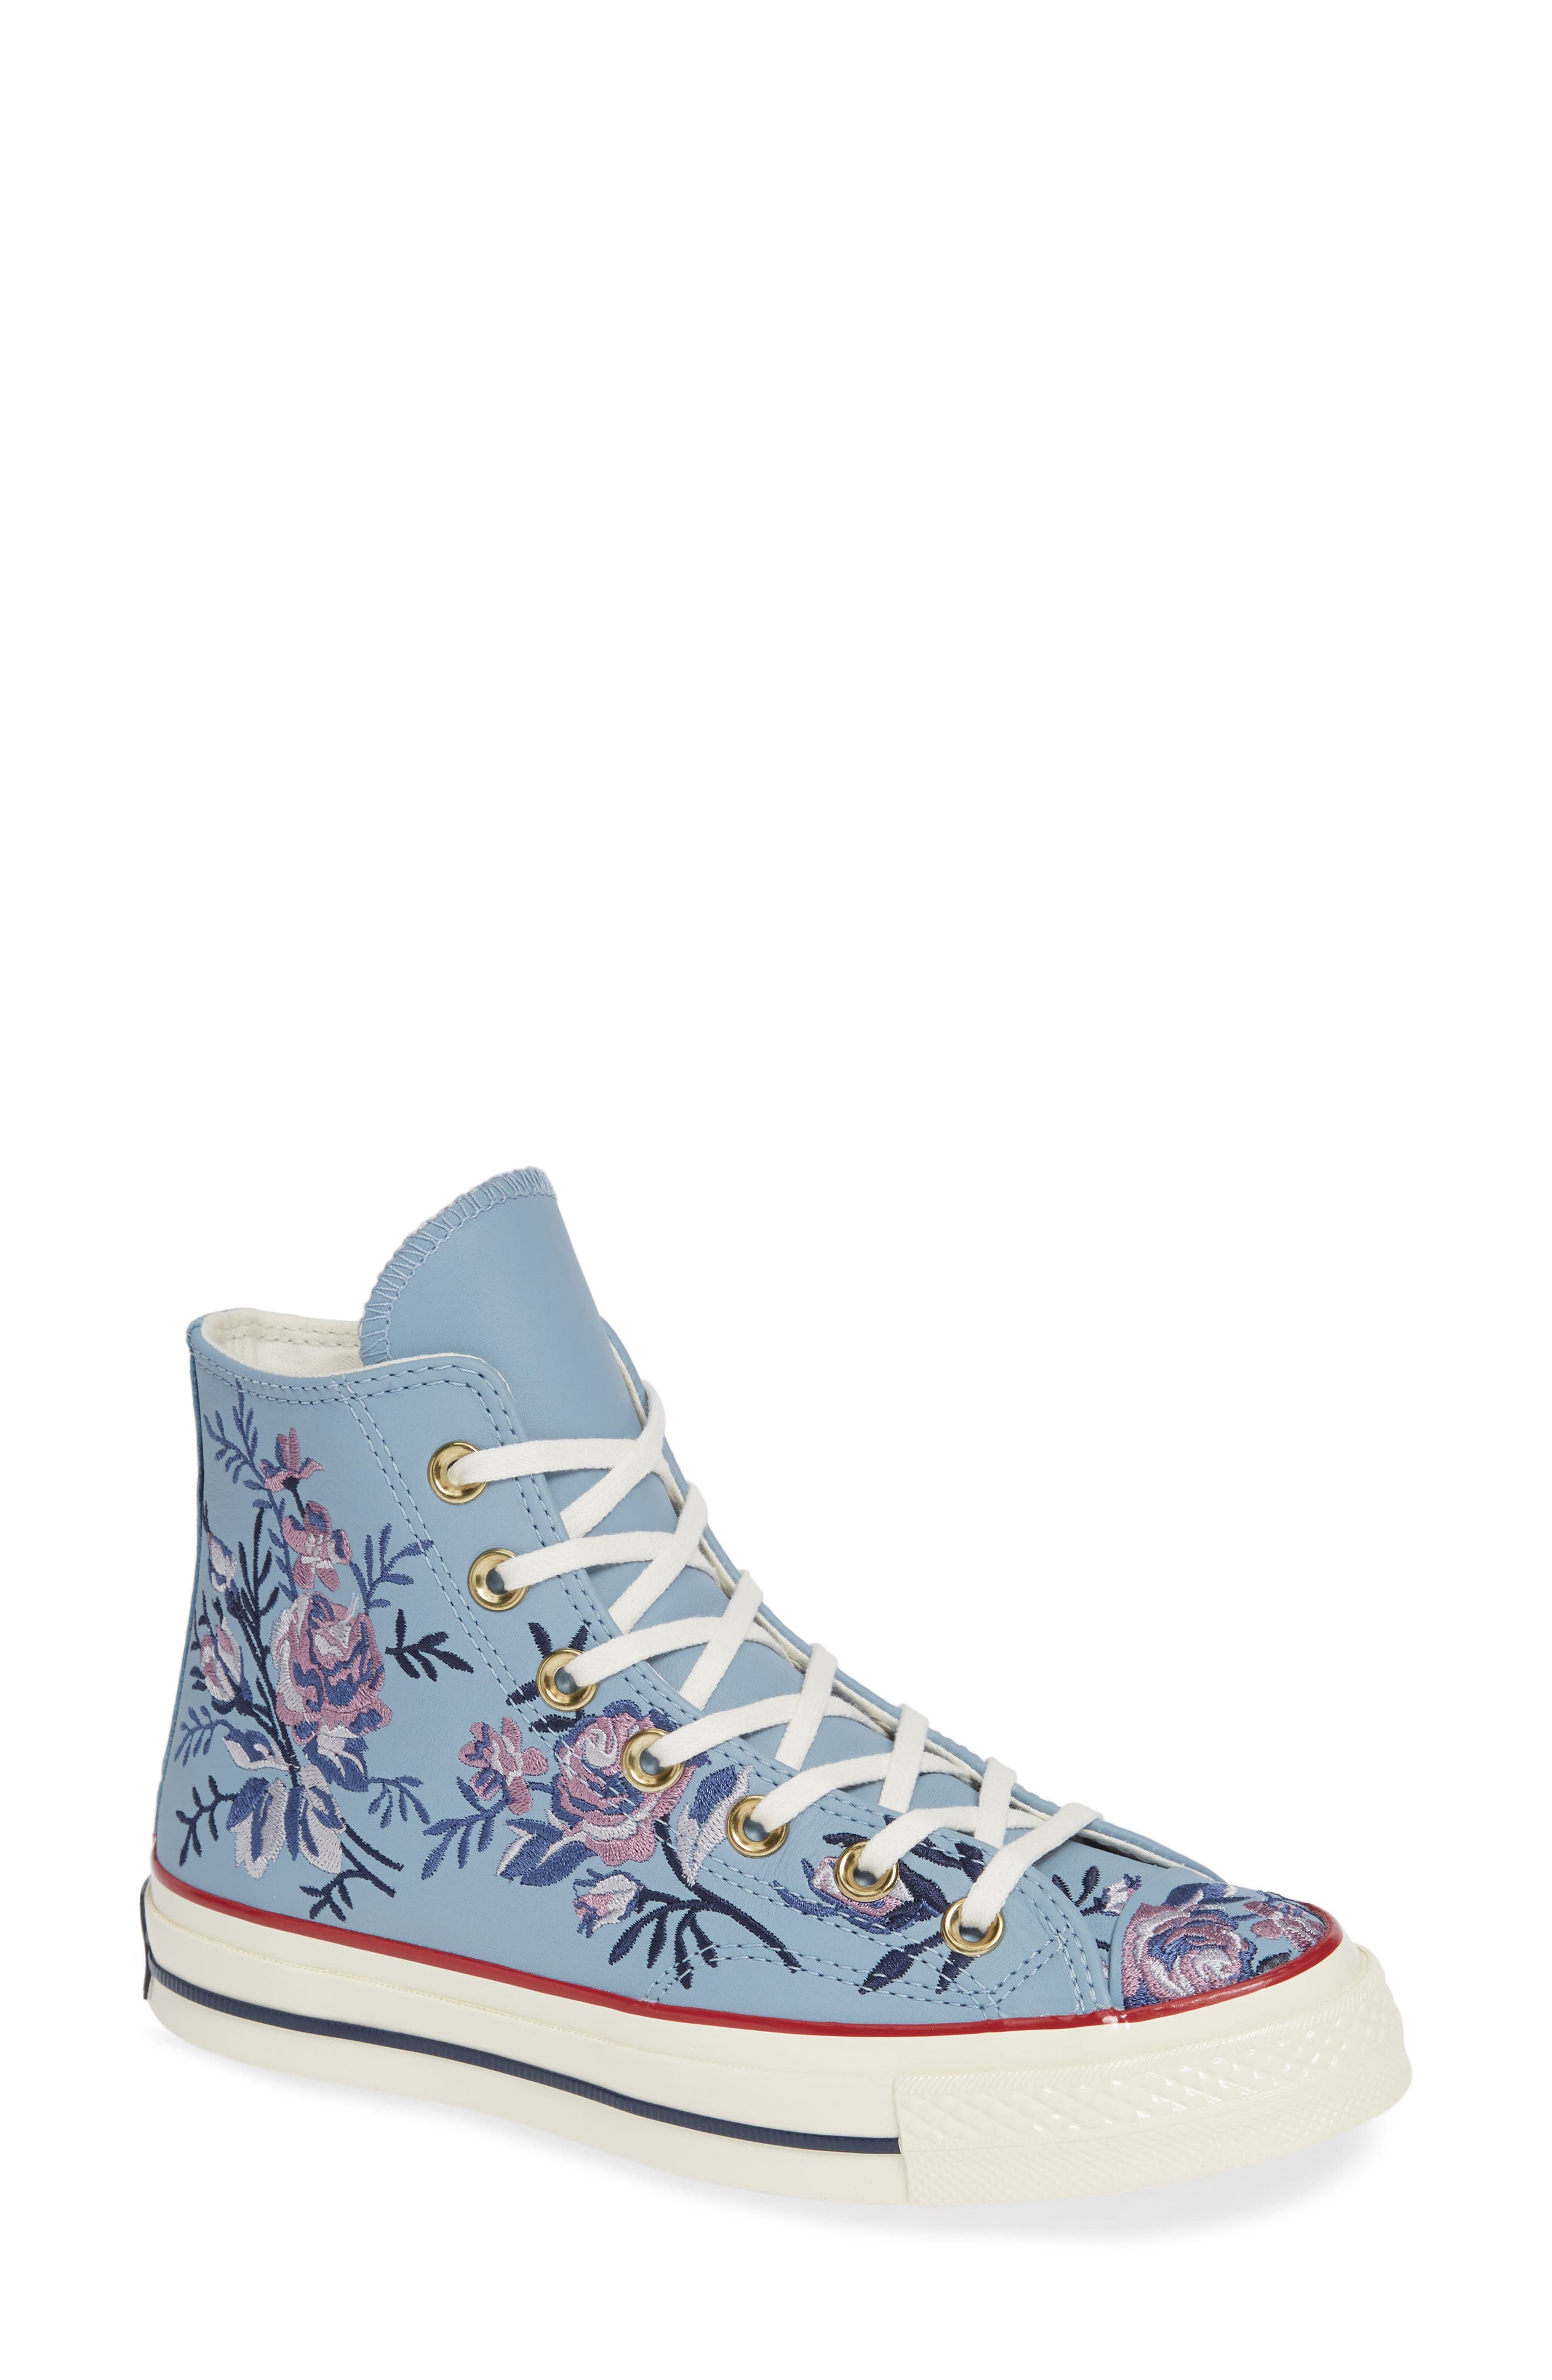 converse floral parkway collection